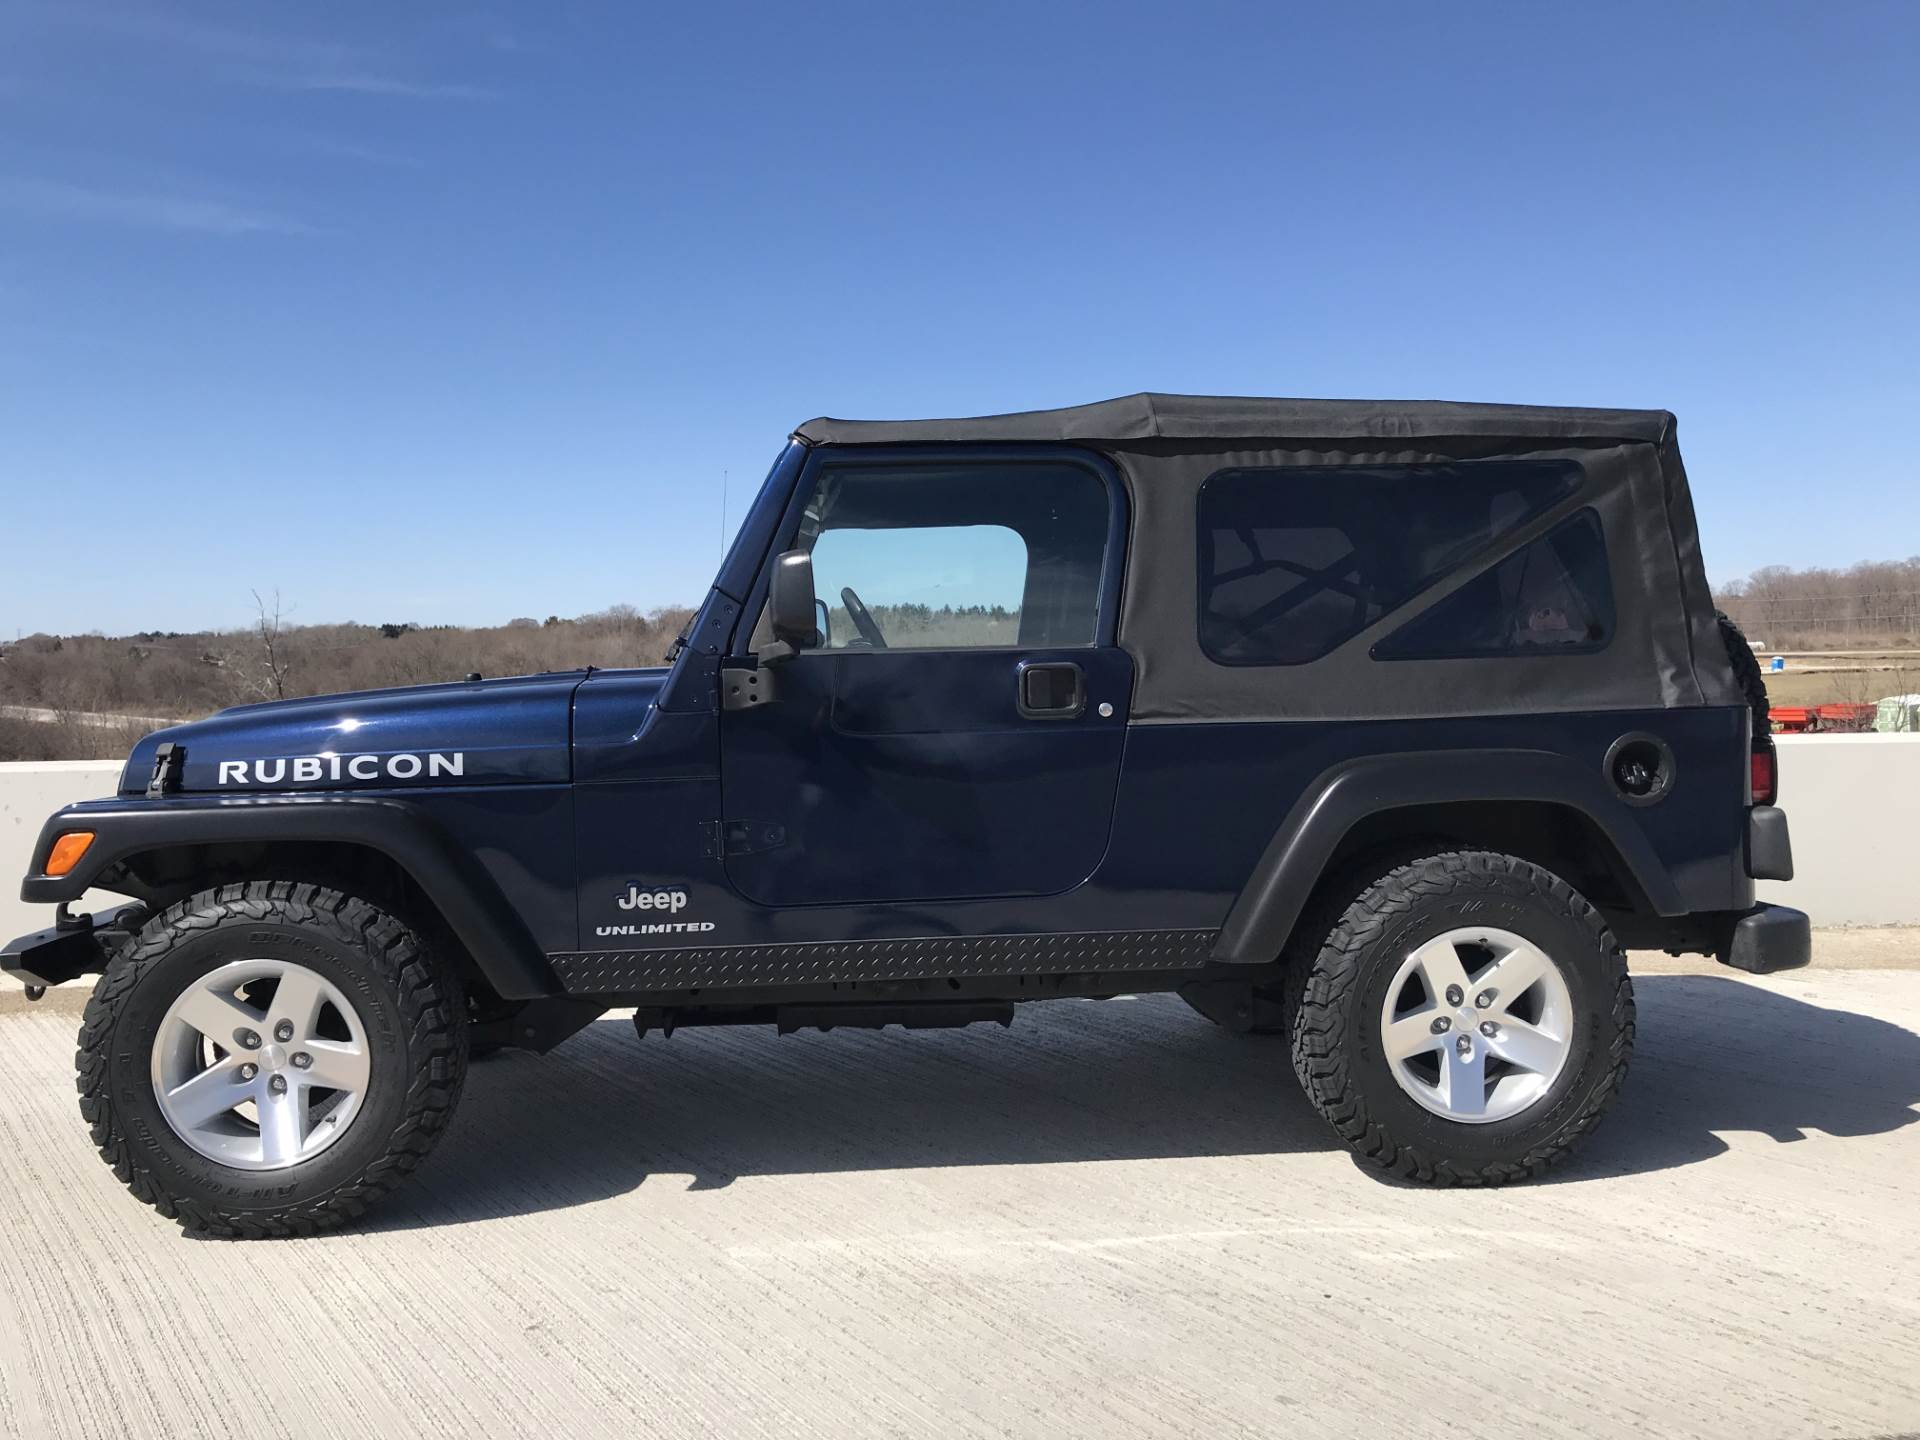 2006 Jeep Wrangler Unlimited Rubicon 2dr SUV 4WD in Big Bend, Wisconsin - Photo 120